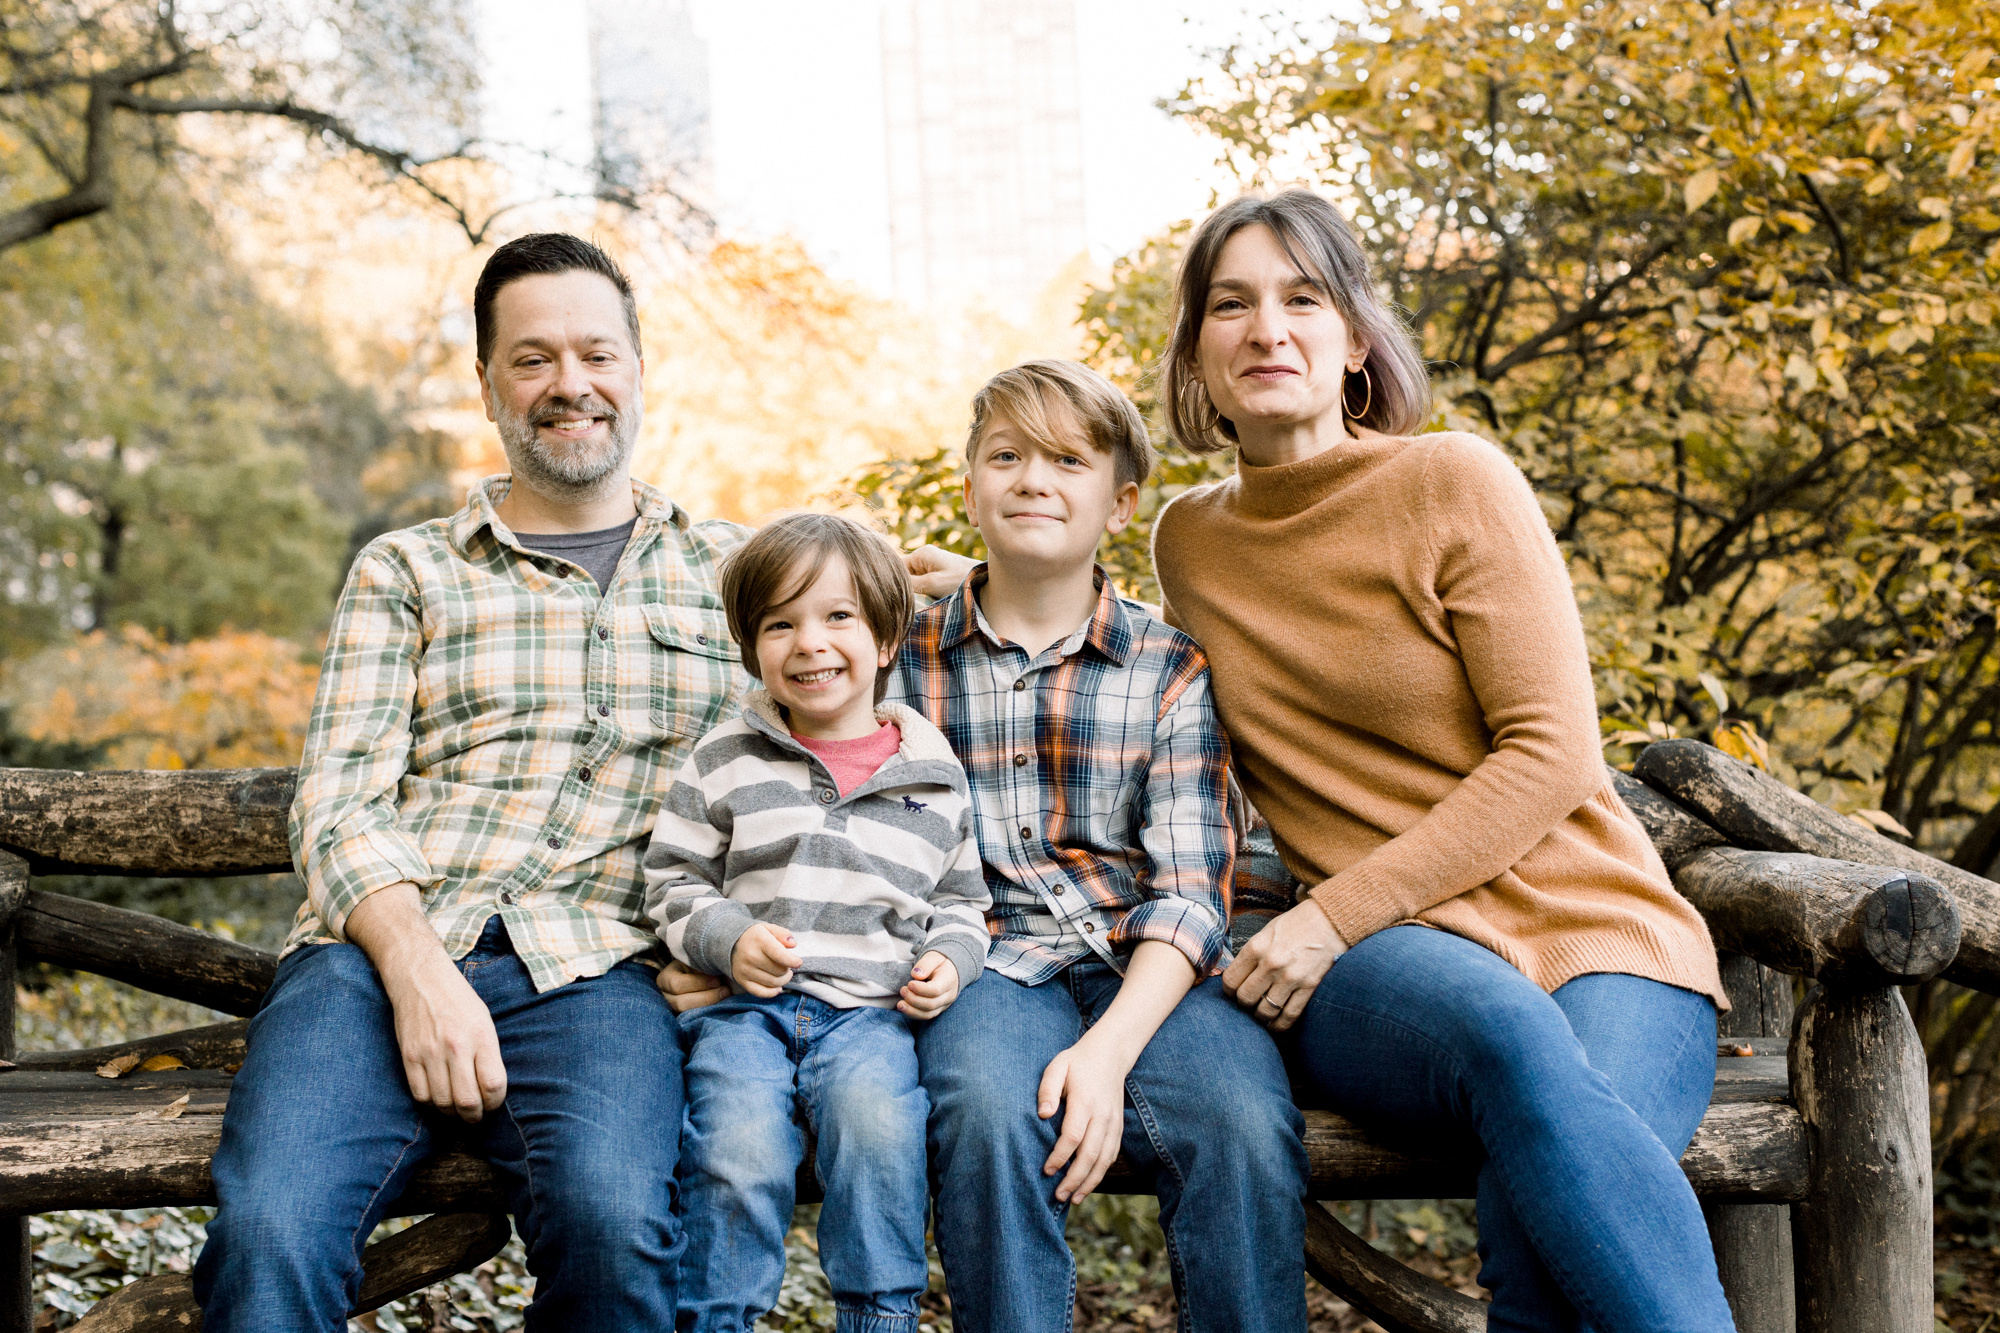 Bright Central Park Family Photos in New York